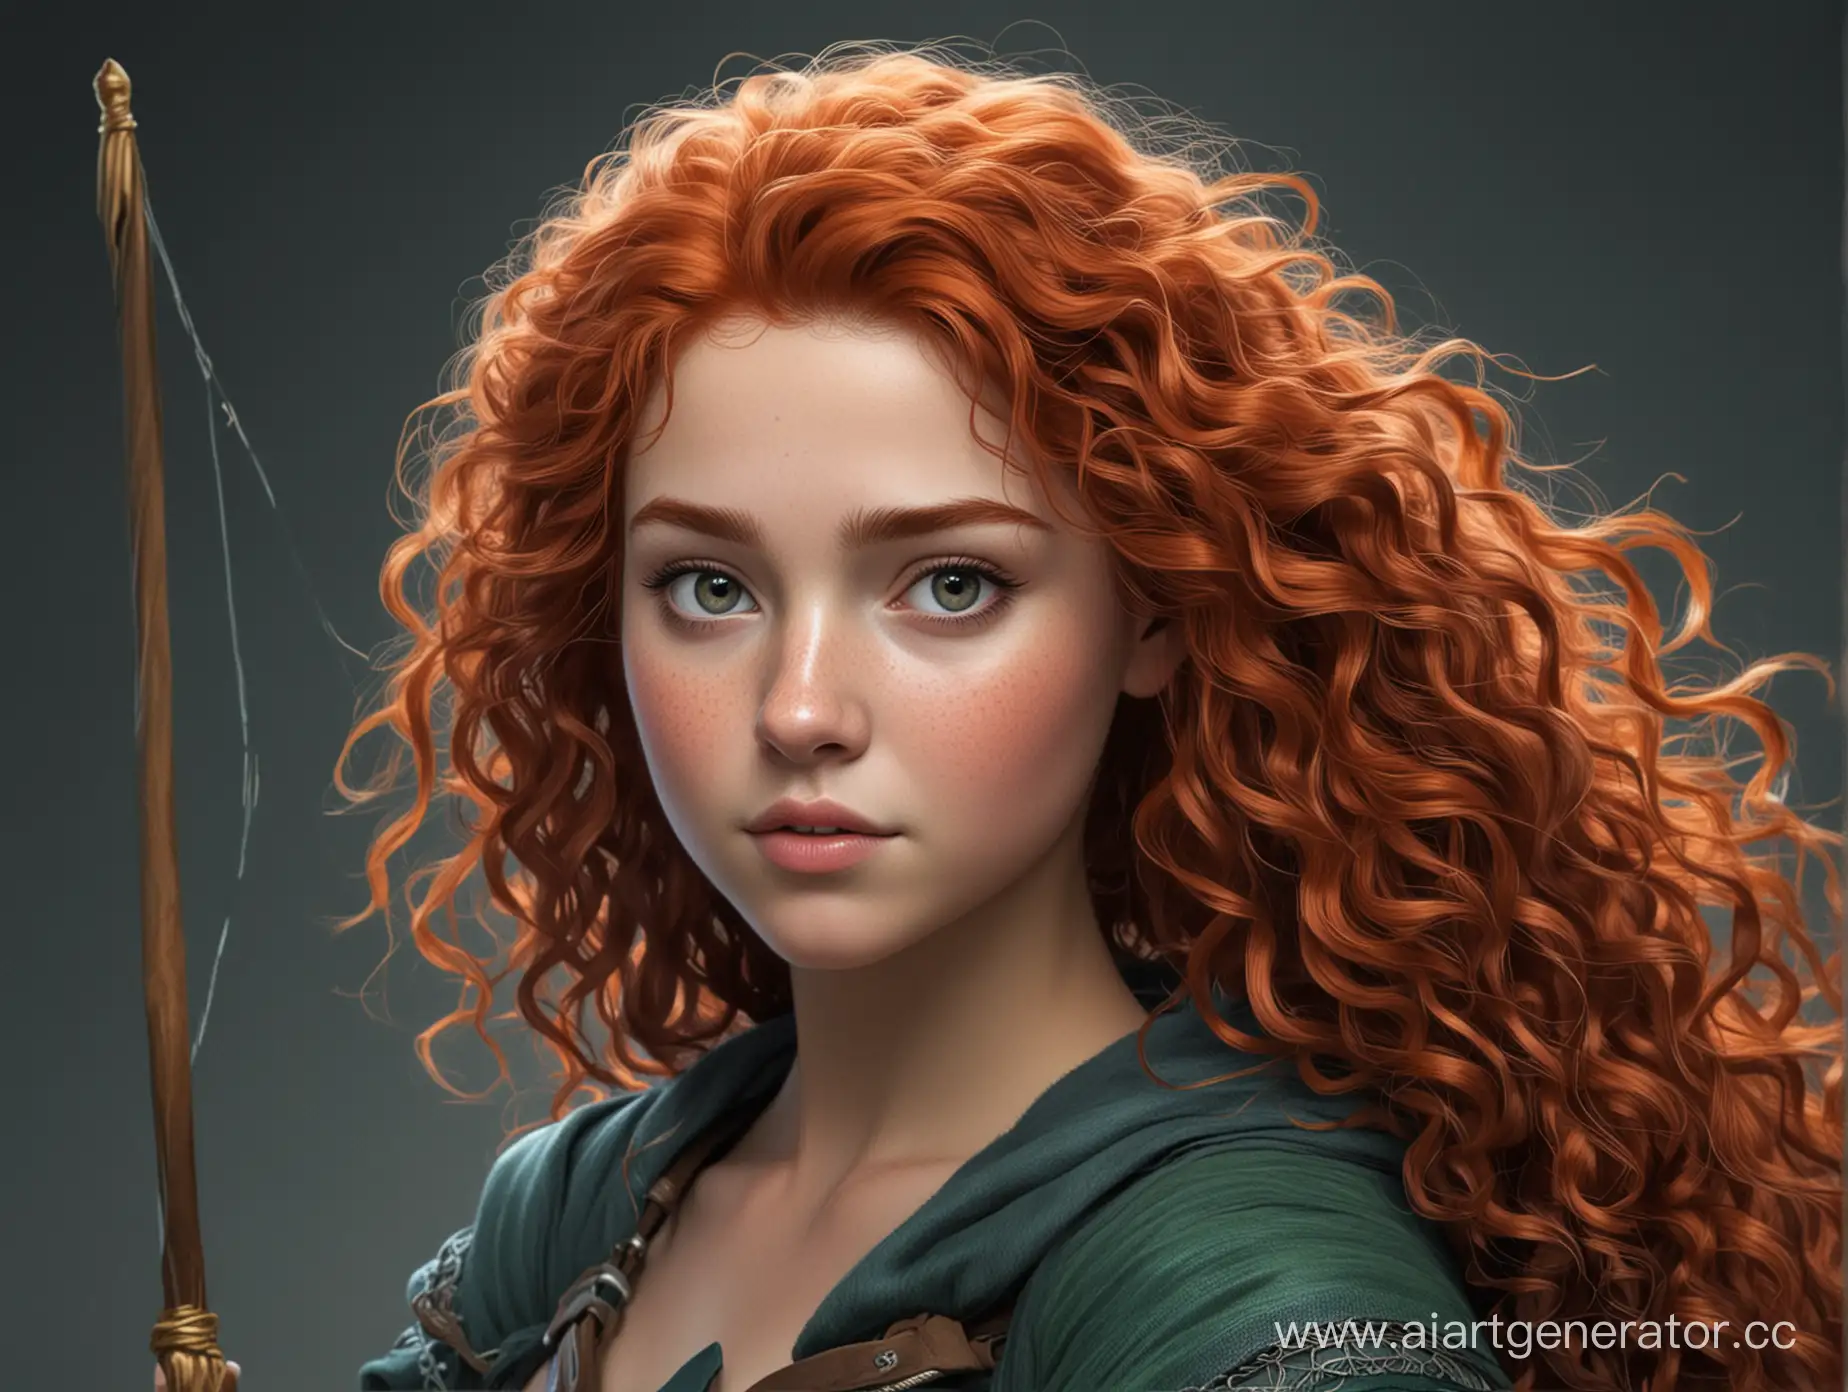 Merida-from-Disneys-Brave-Wielding-Bow-and-Arrow-in-Highland-Scenery